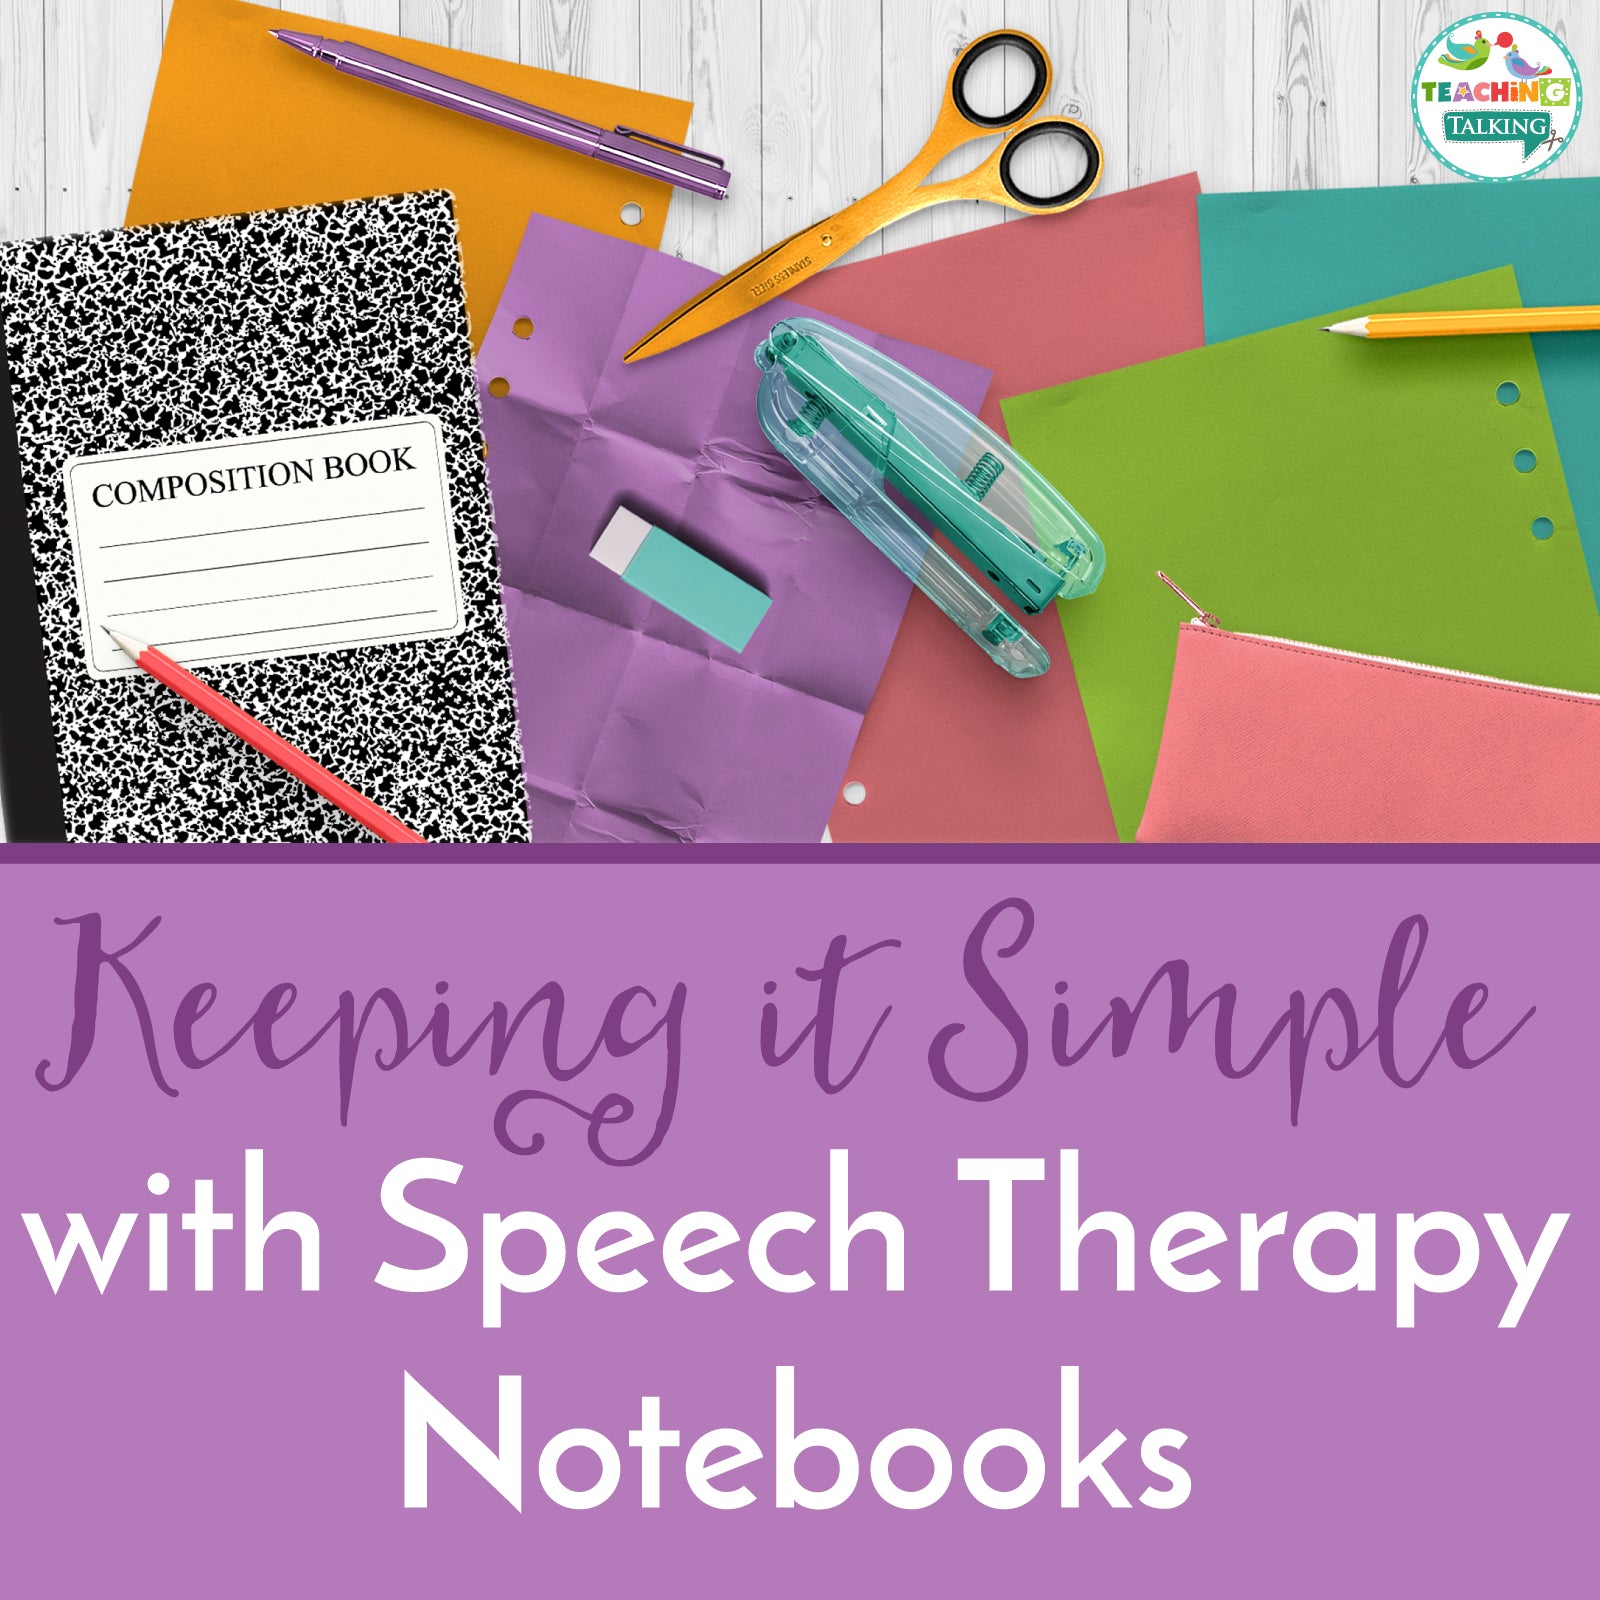 Keep it Simple Using Speech Therapy Notebooks